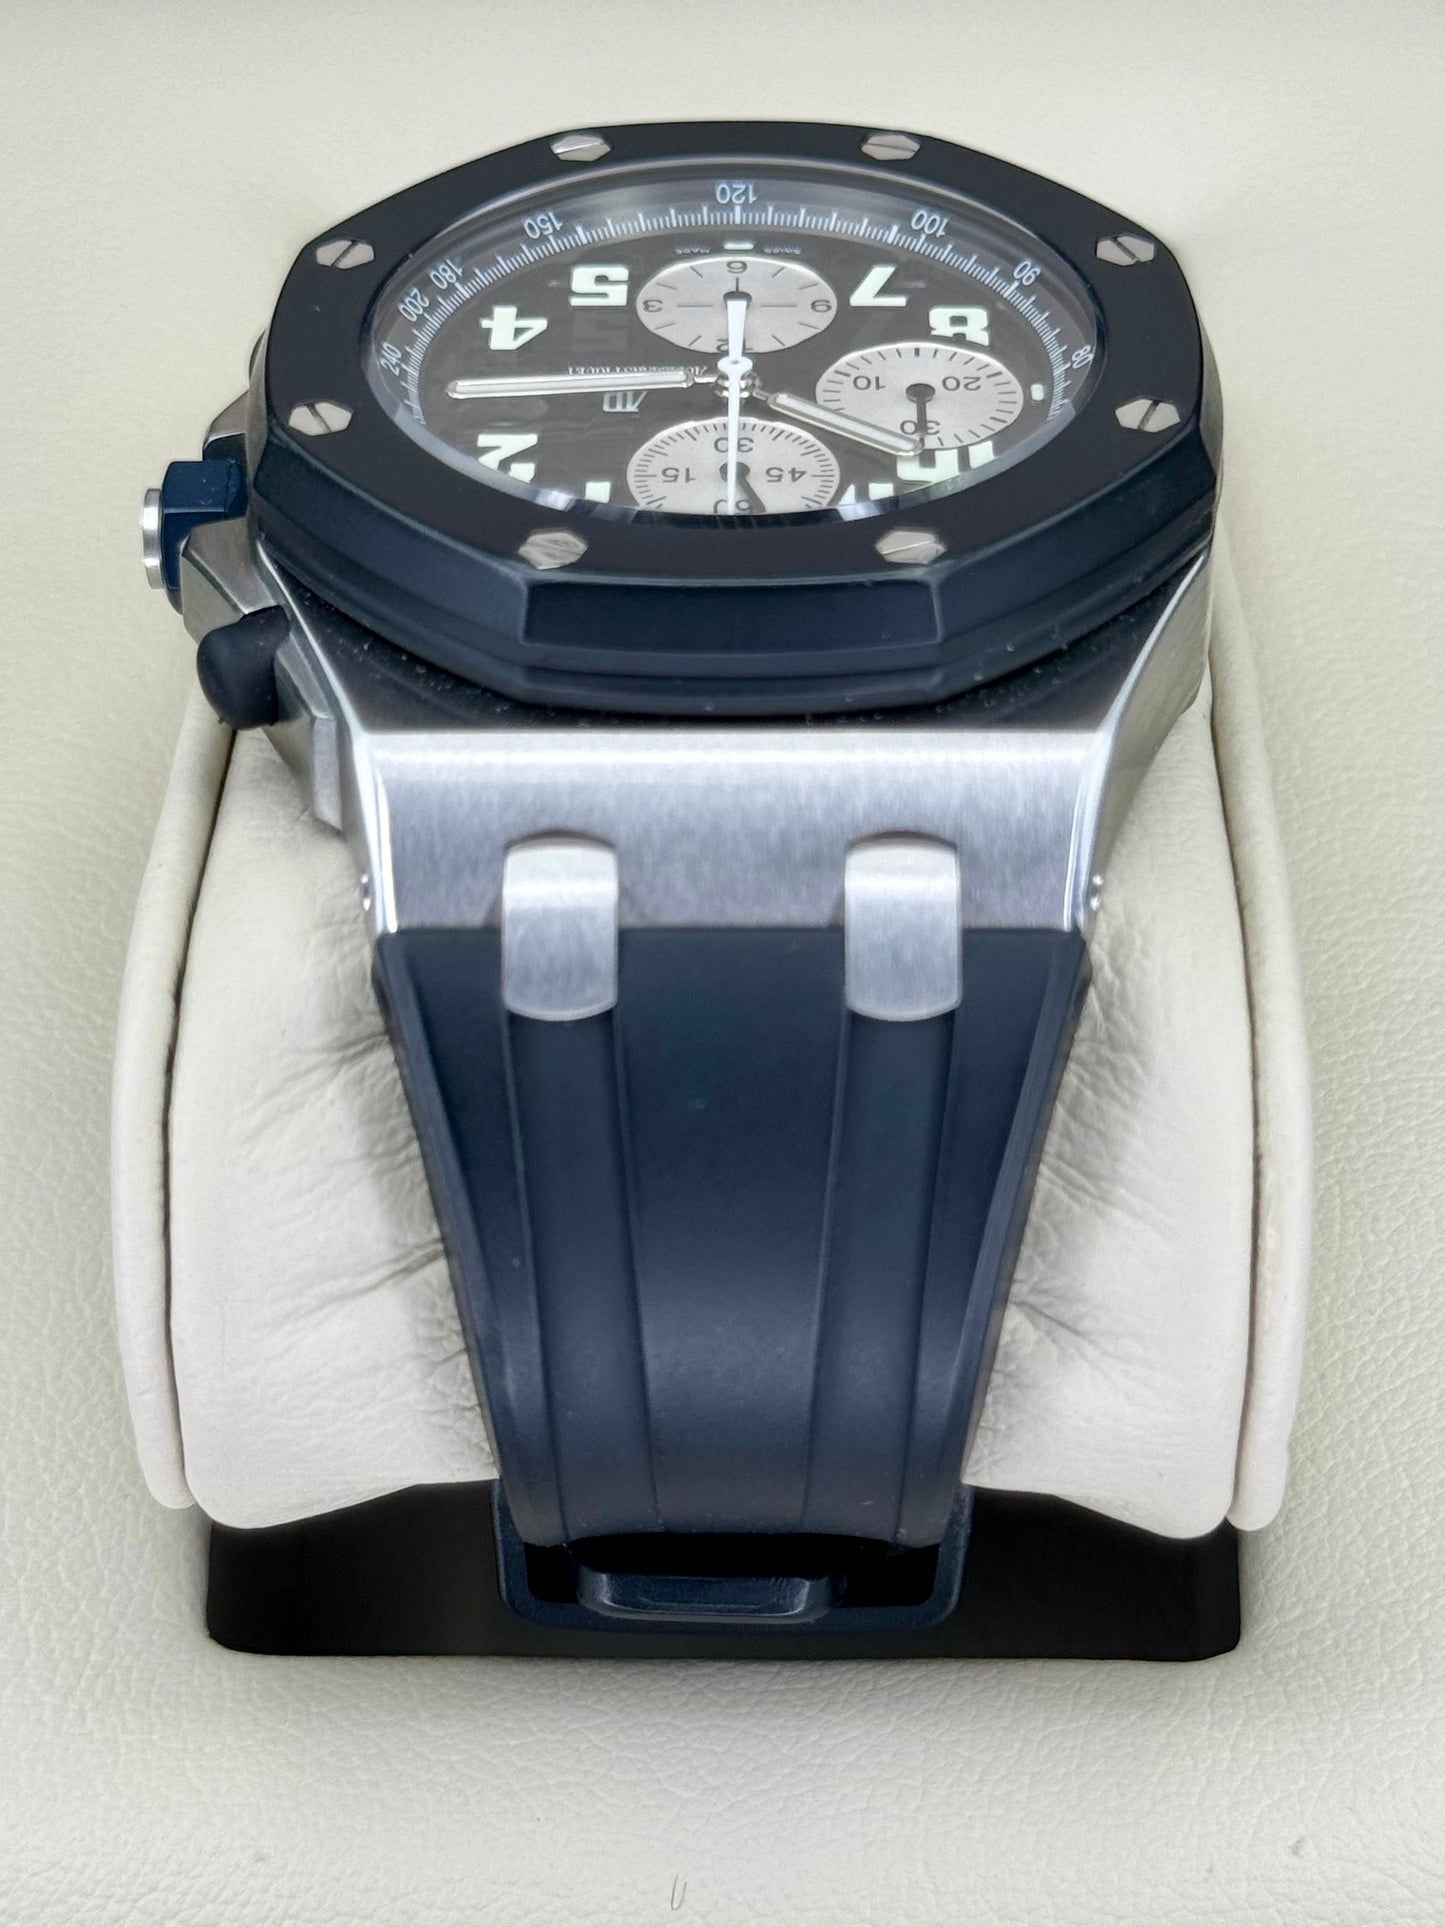 2006 AP Royal Oak Offshore 42mm 25940SK.OO.D002CA.01.A Chronograph - MyWatchLLC